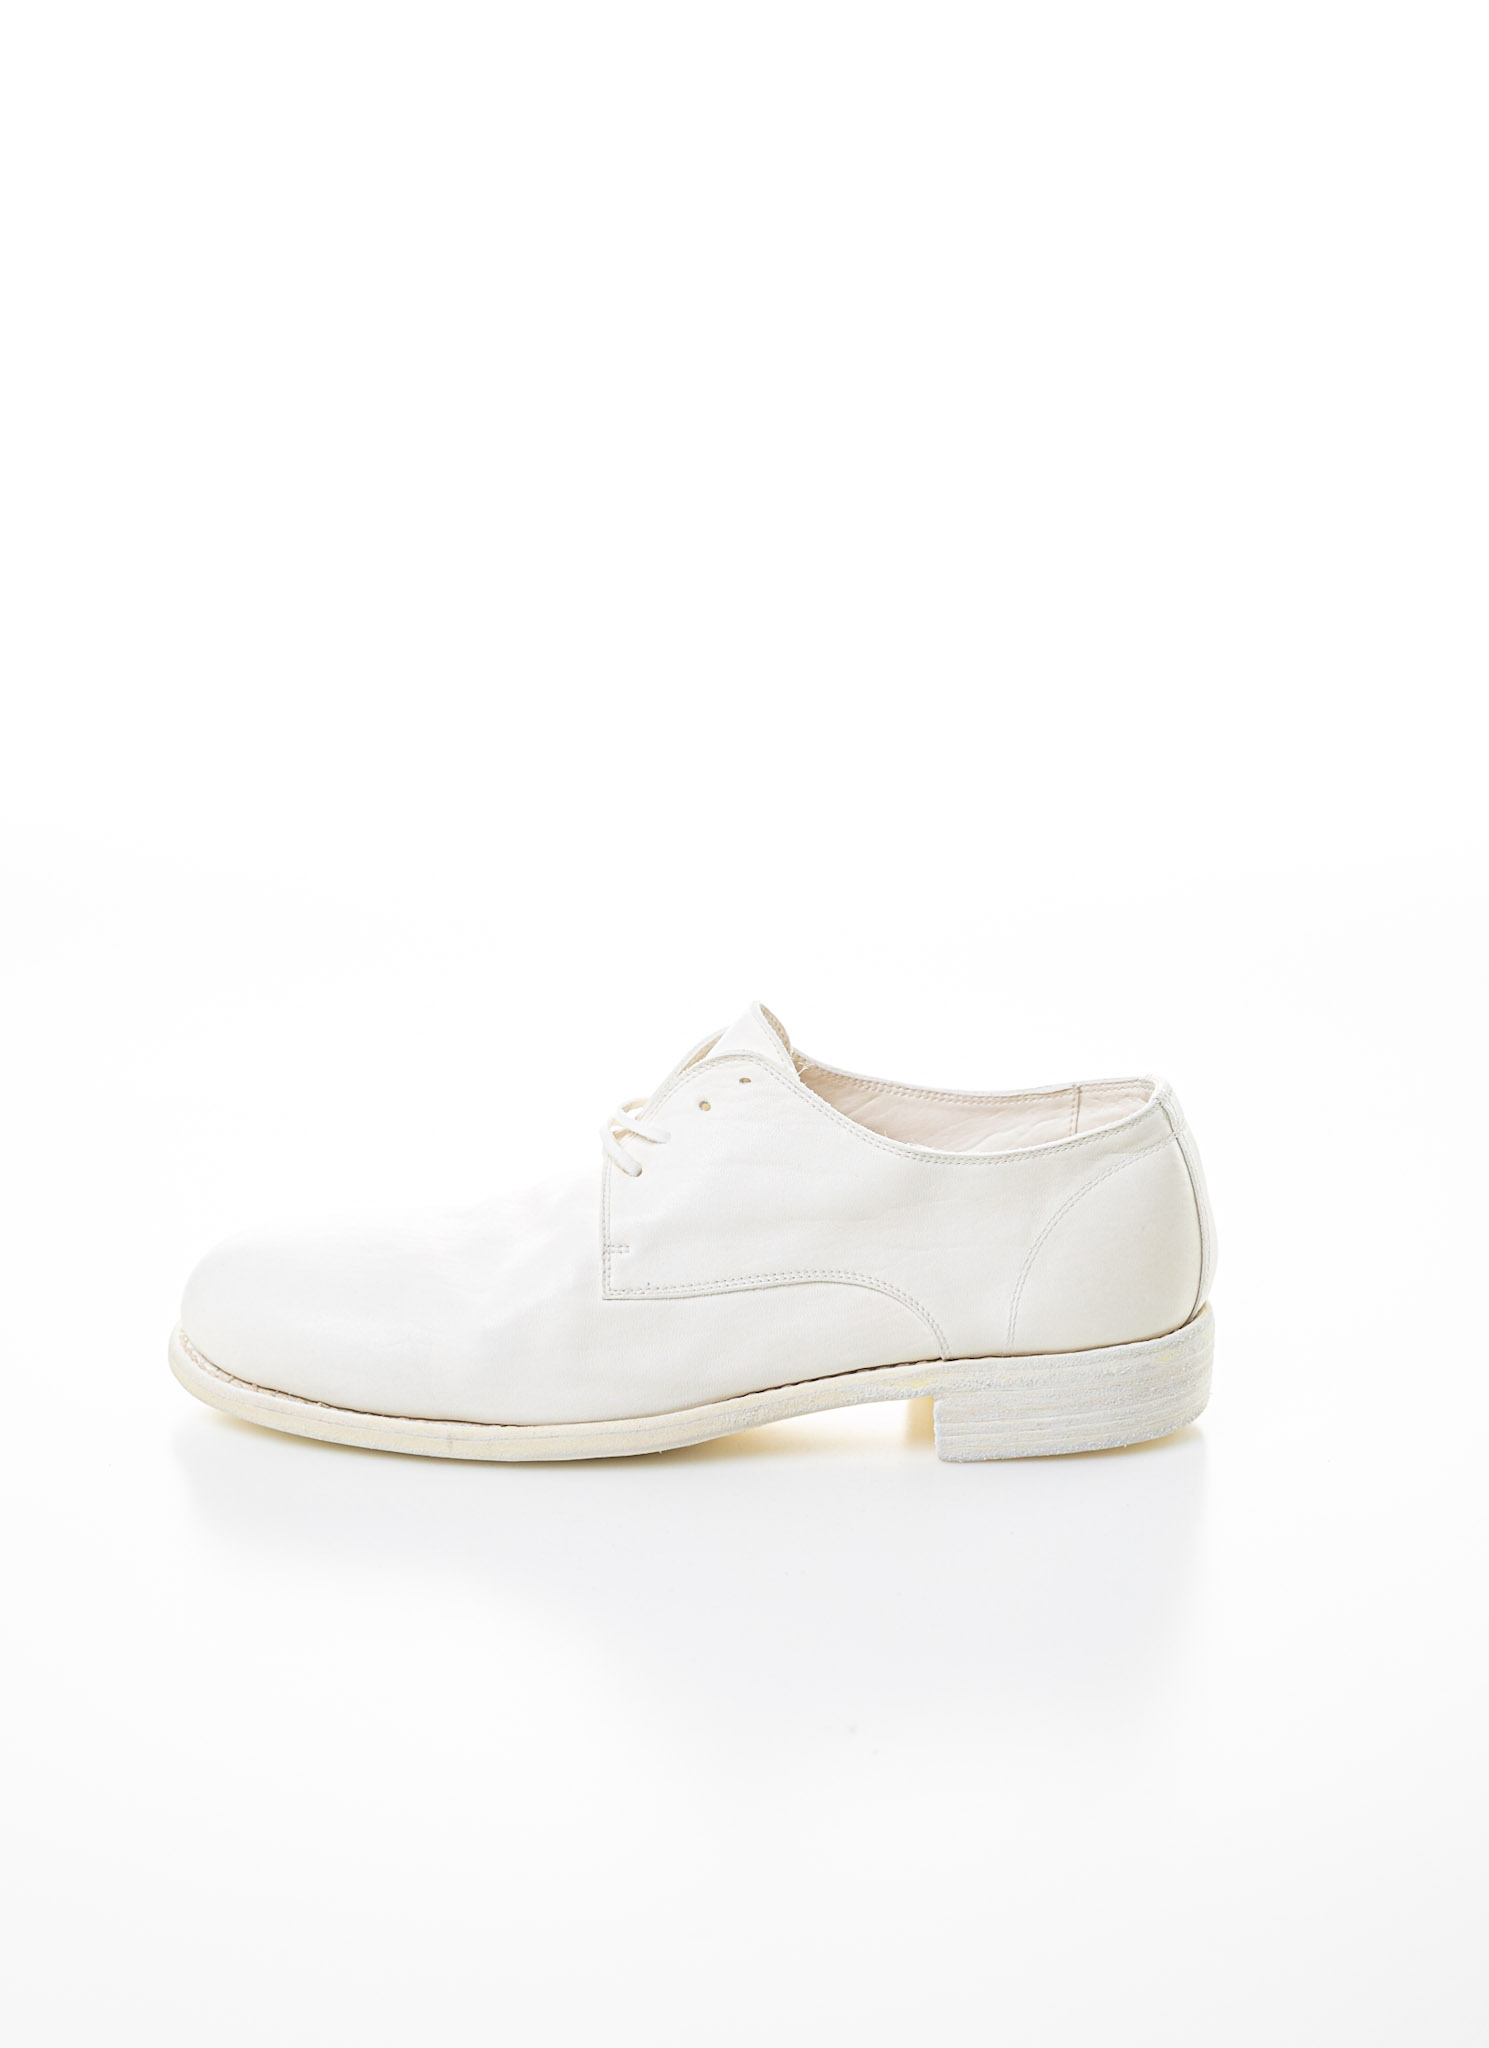 white derby shoes